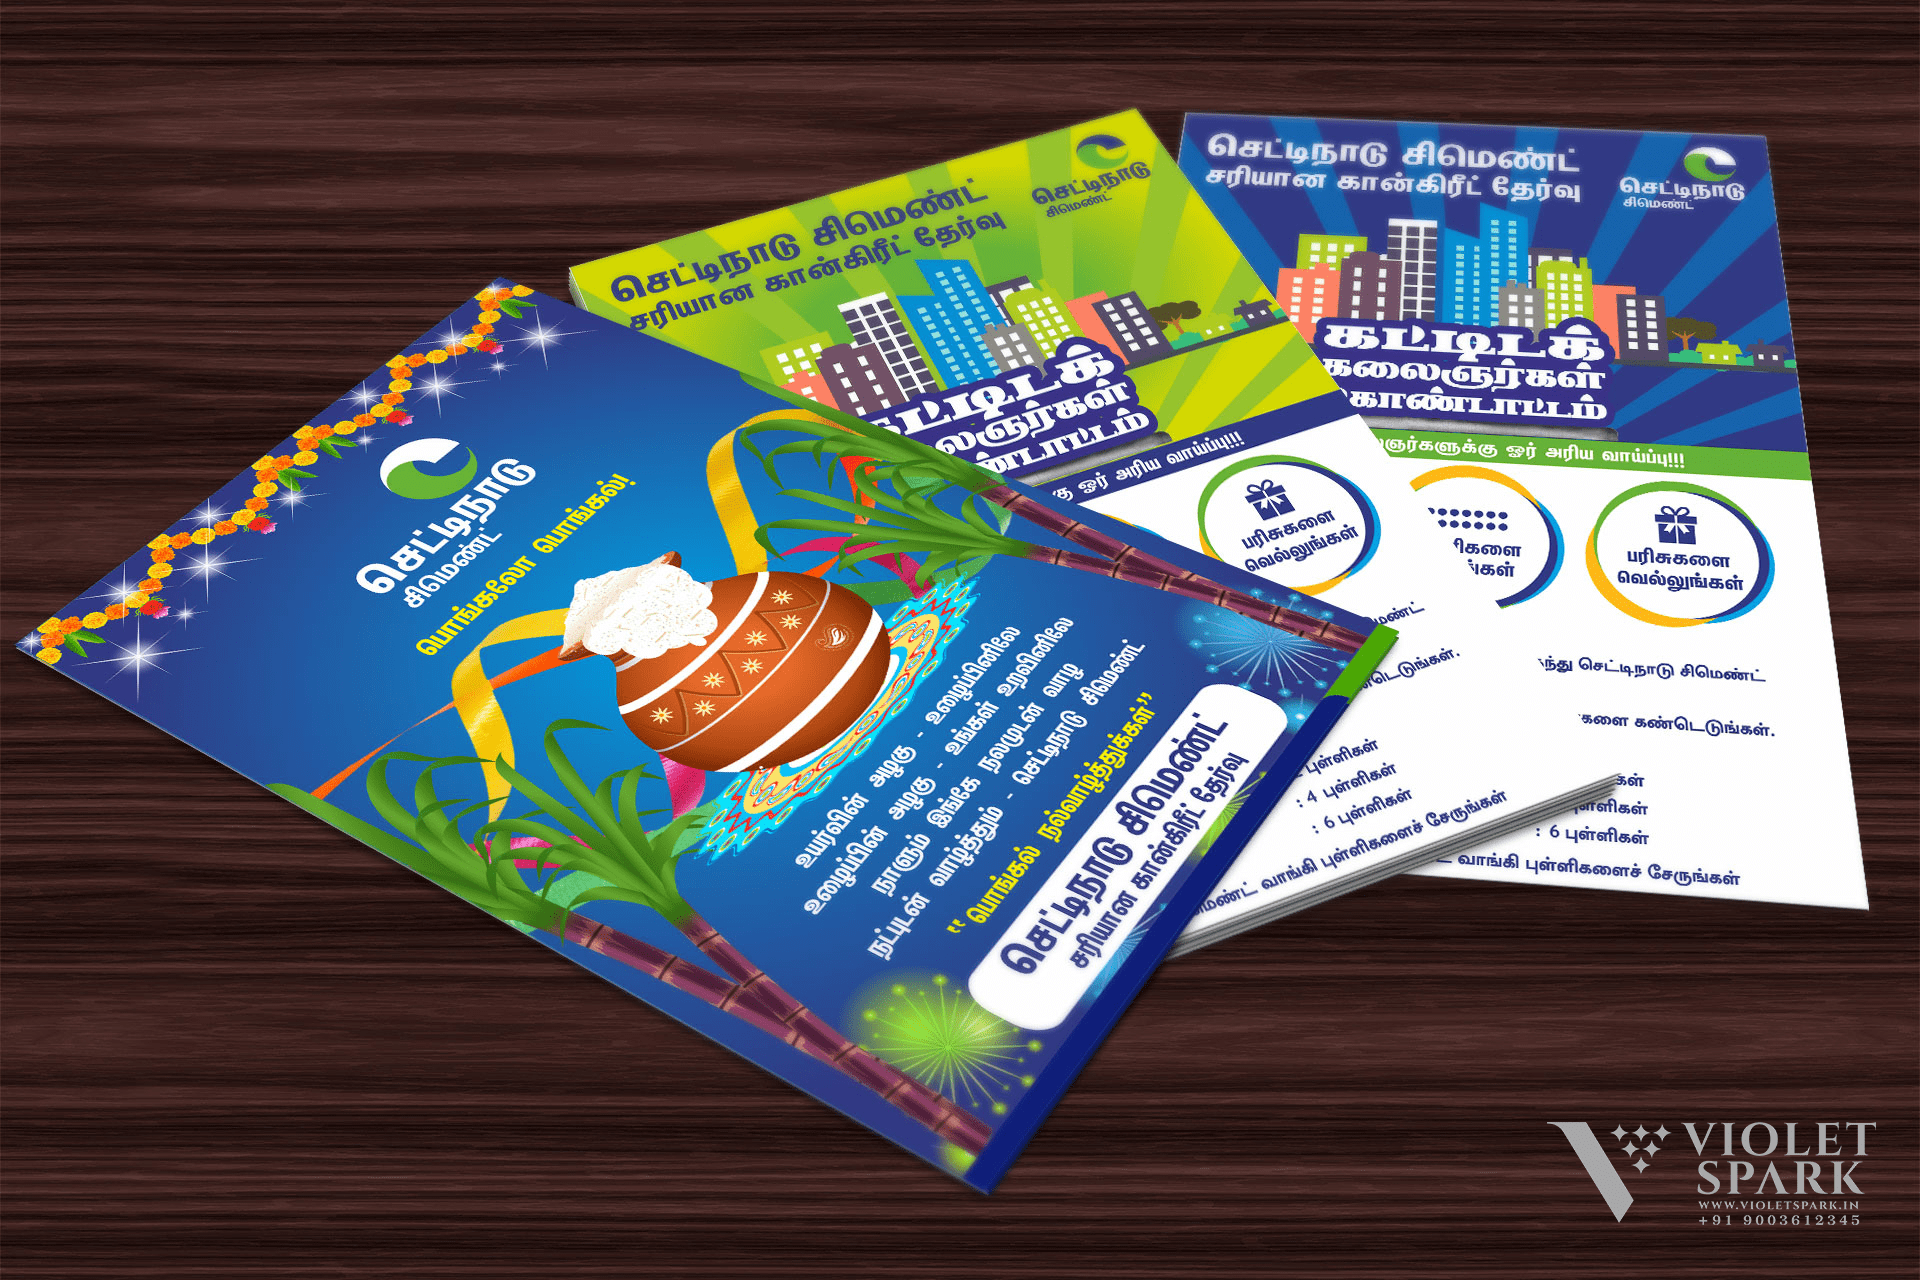 Chettinad Cement Flyers Branding Packaging Design Digital Marketing in Chennai by Violet Spark